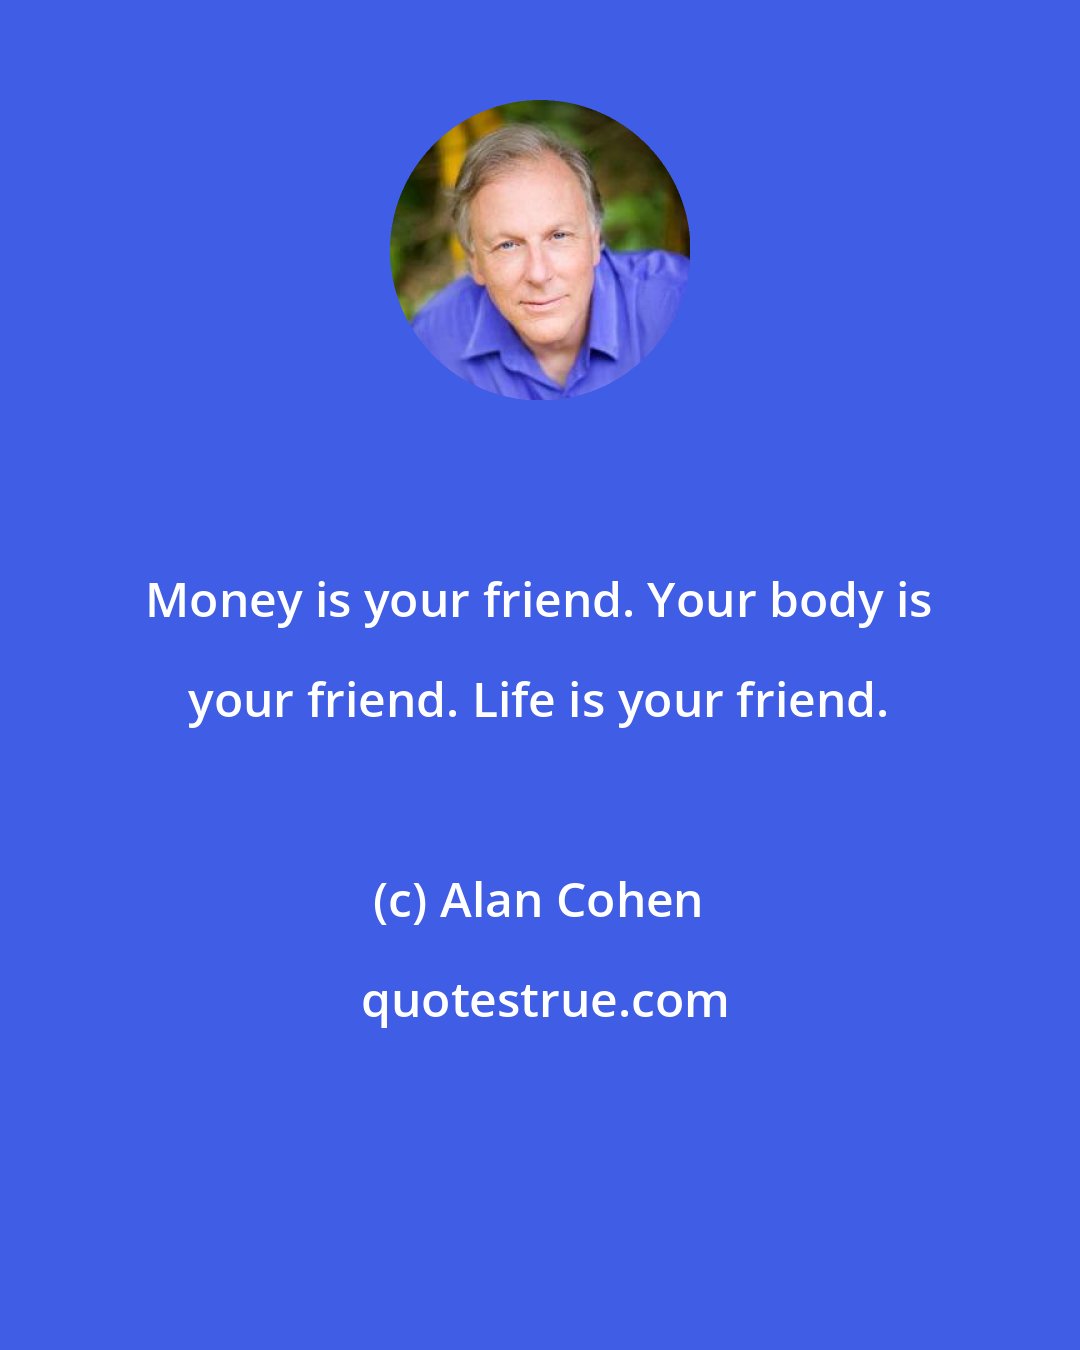 Alan Cohen: Money is your friend. Your body is your friend. Life is your friend.